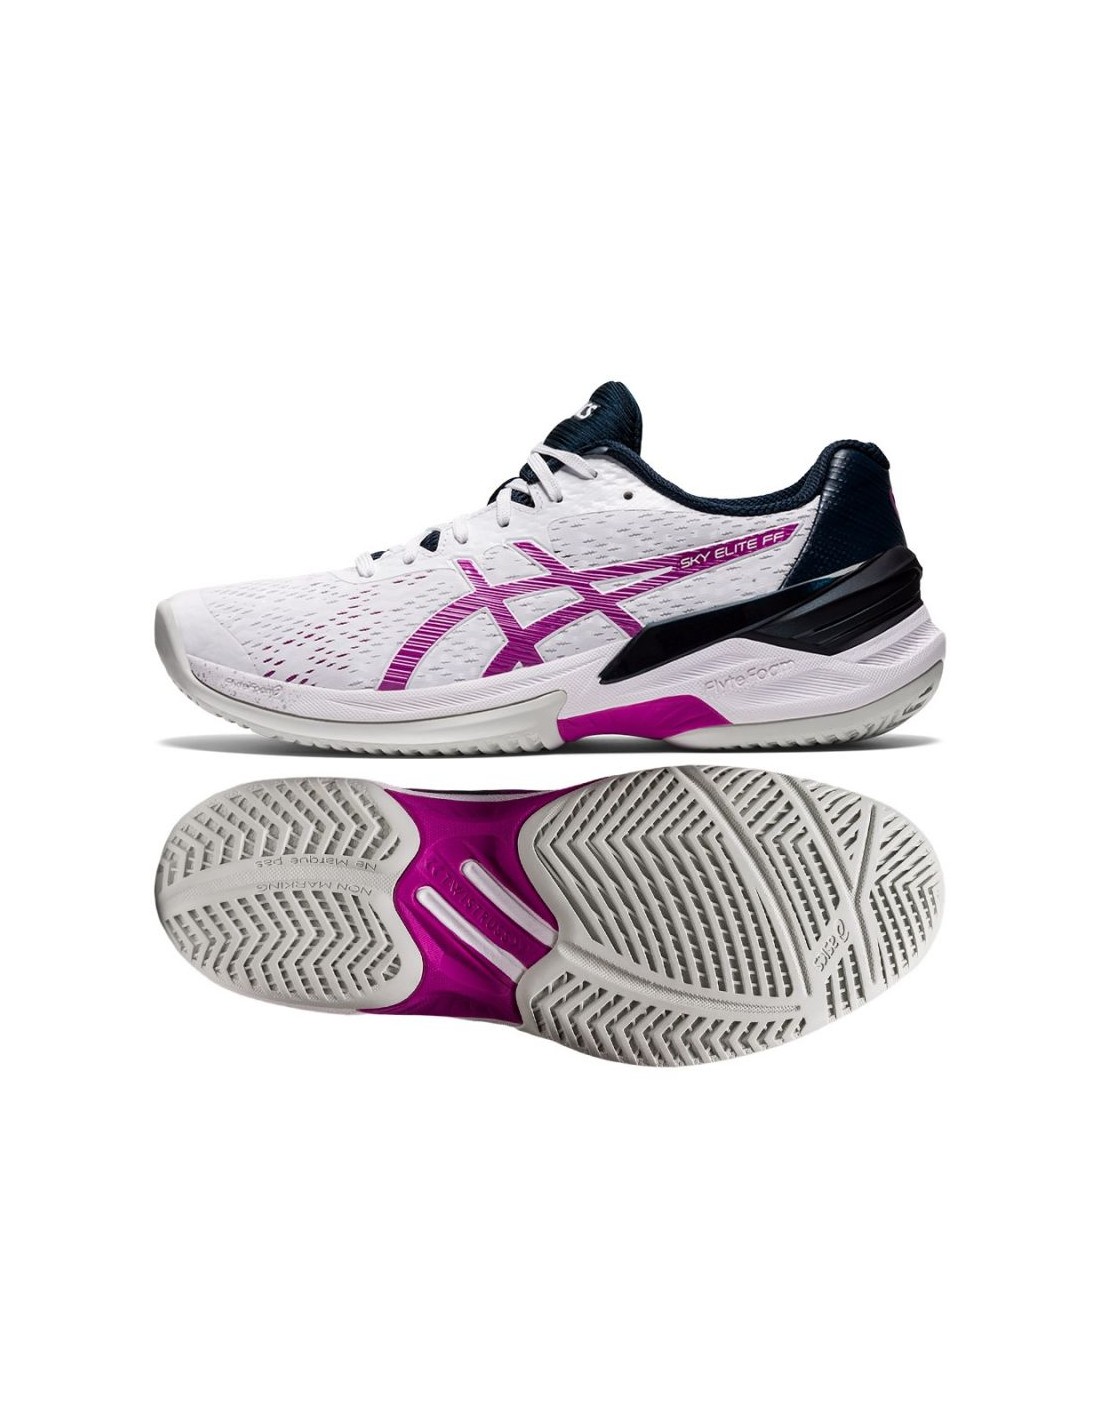 Asics SKY ELITE FF W 1052A024-103 volleyball shoes